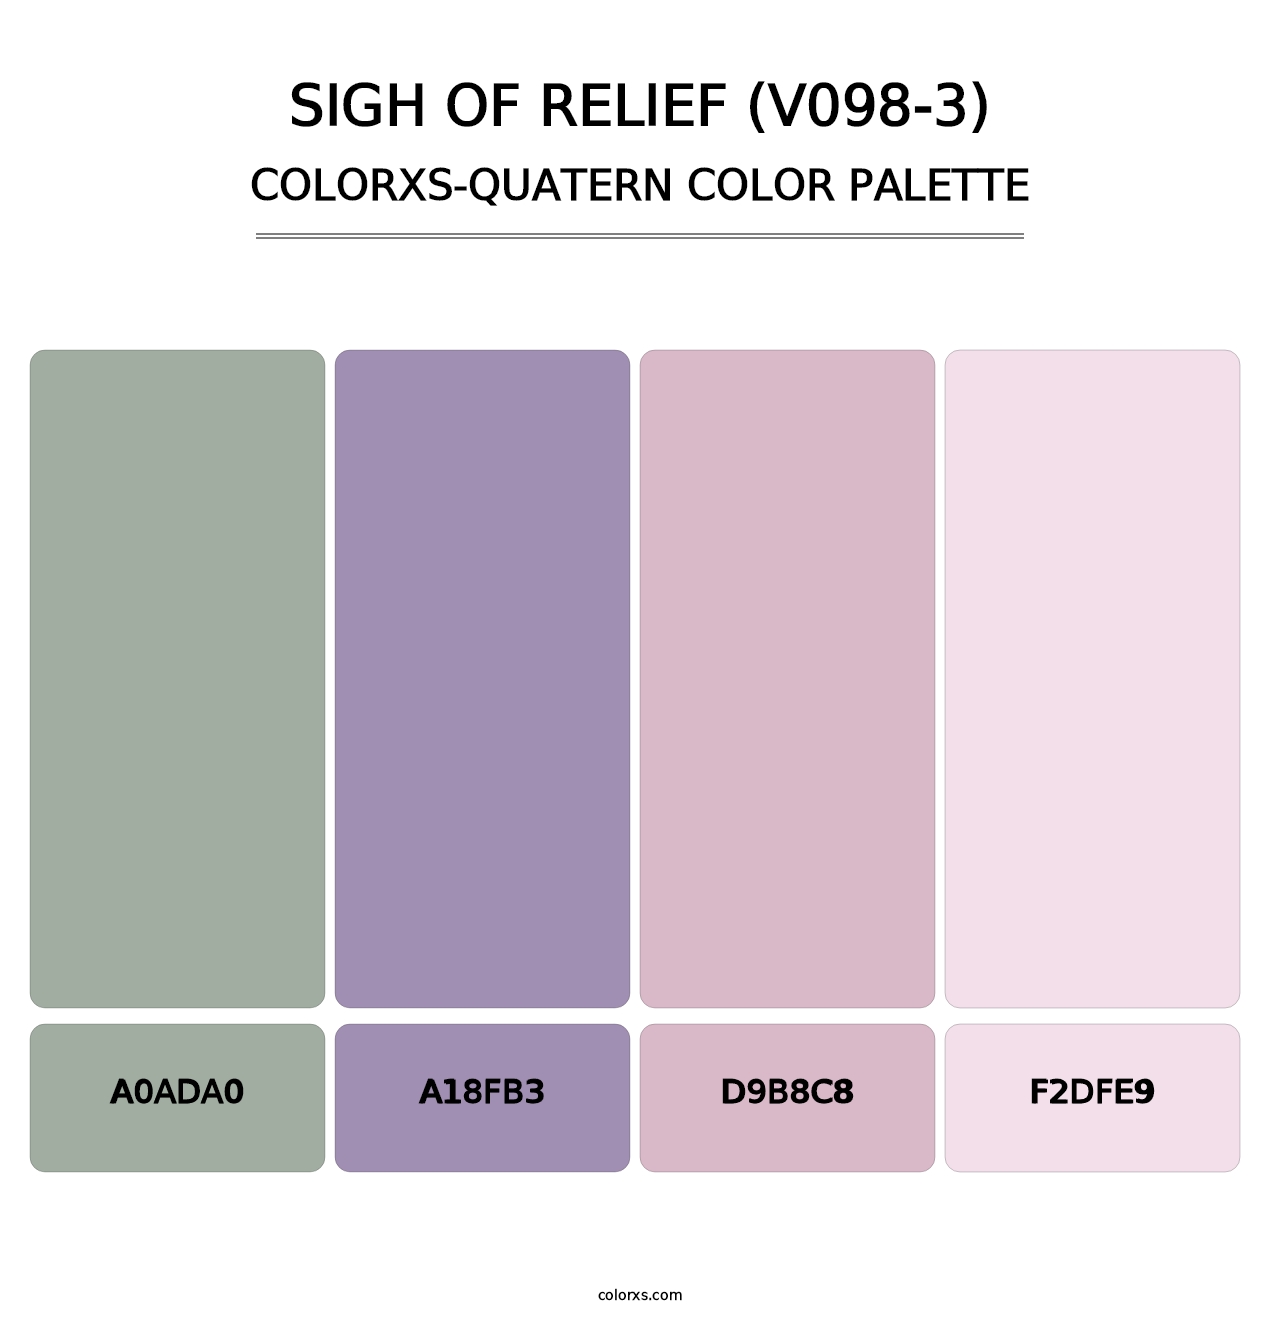 Sigh of Relief (V098-3) - Colorxs Quatern Palette